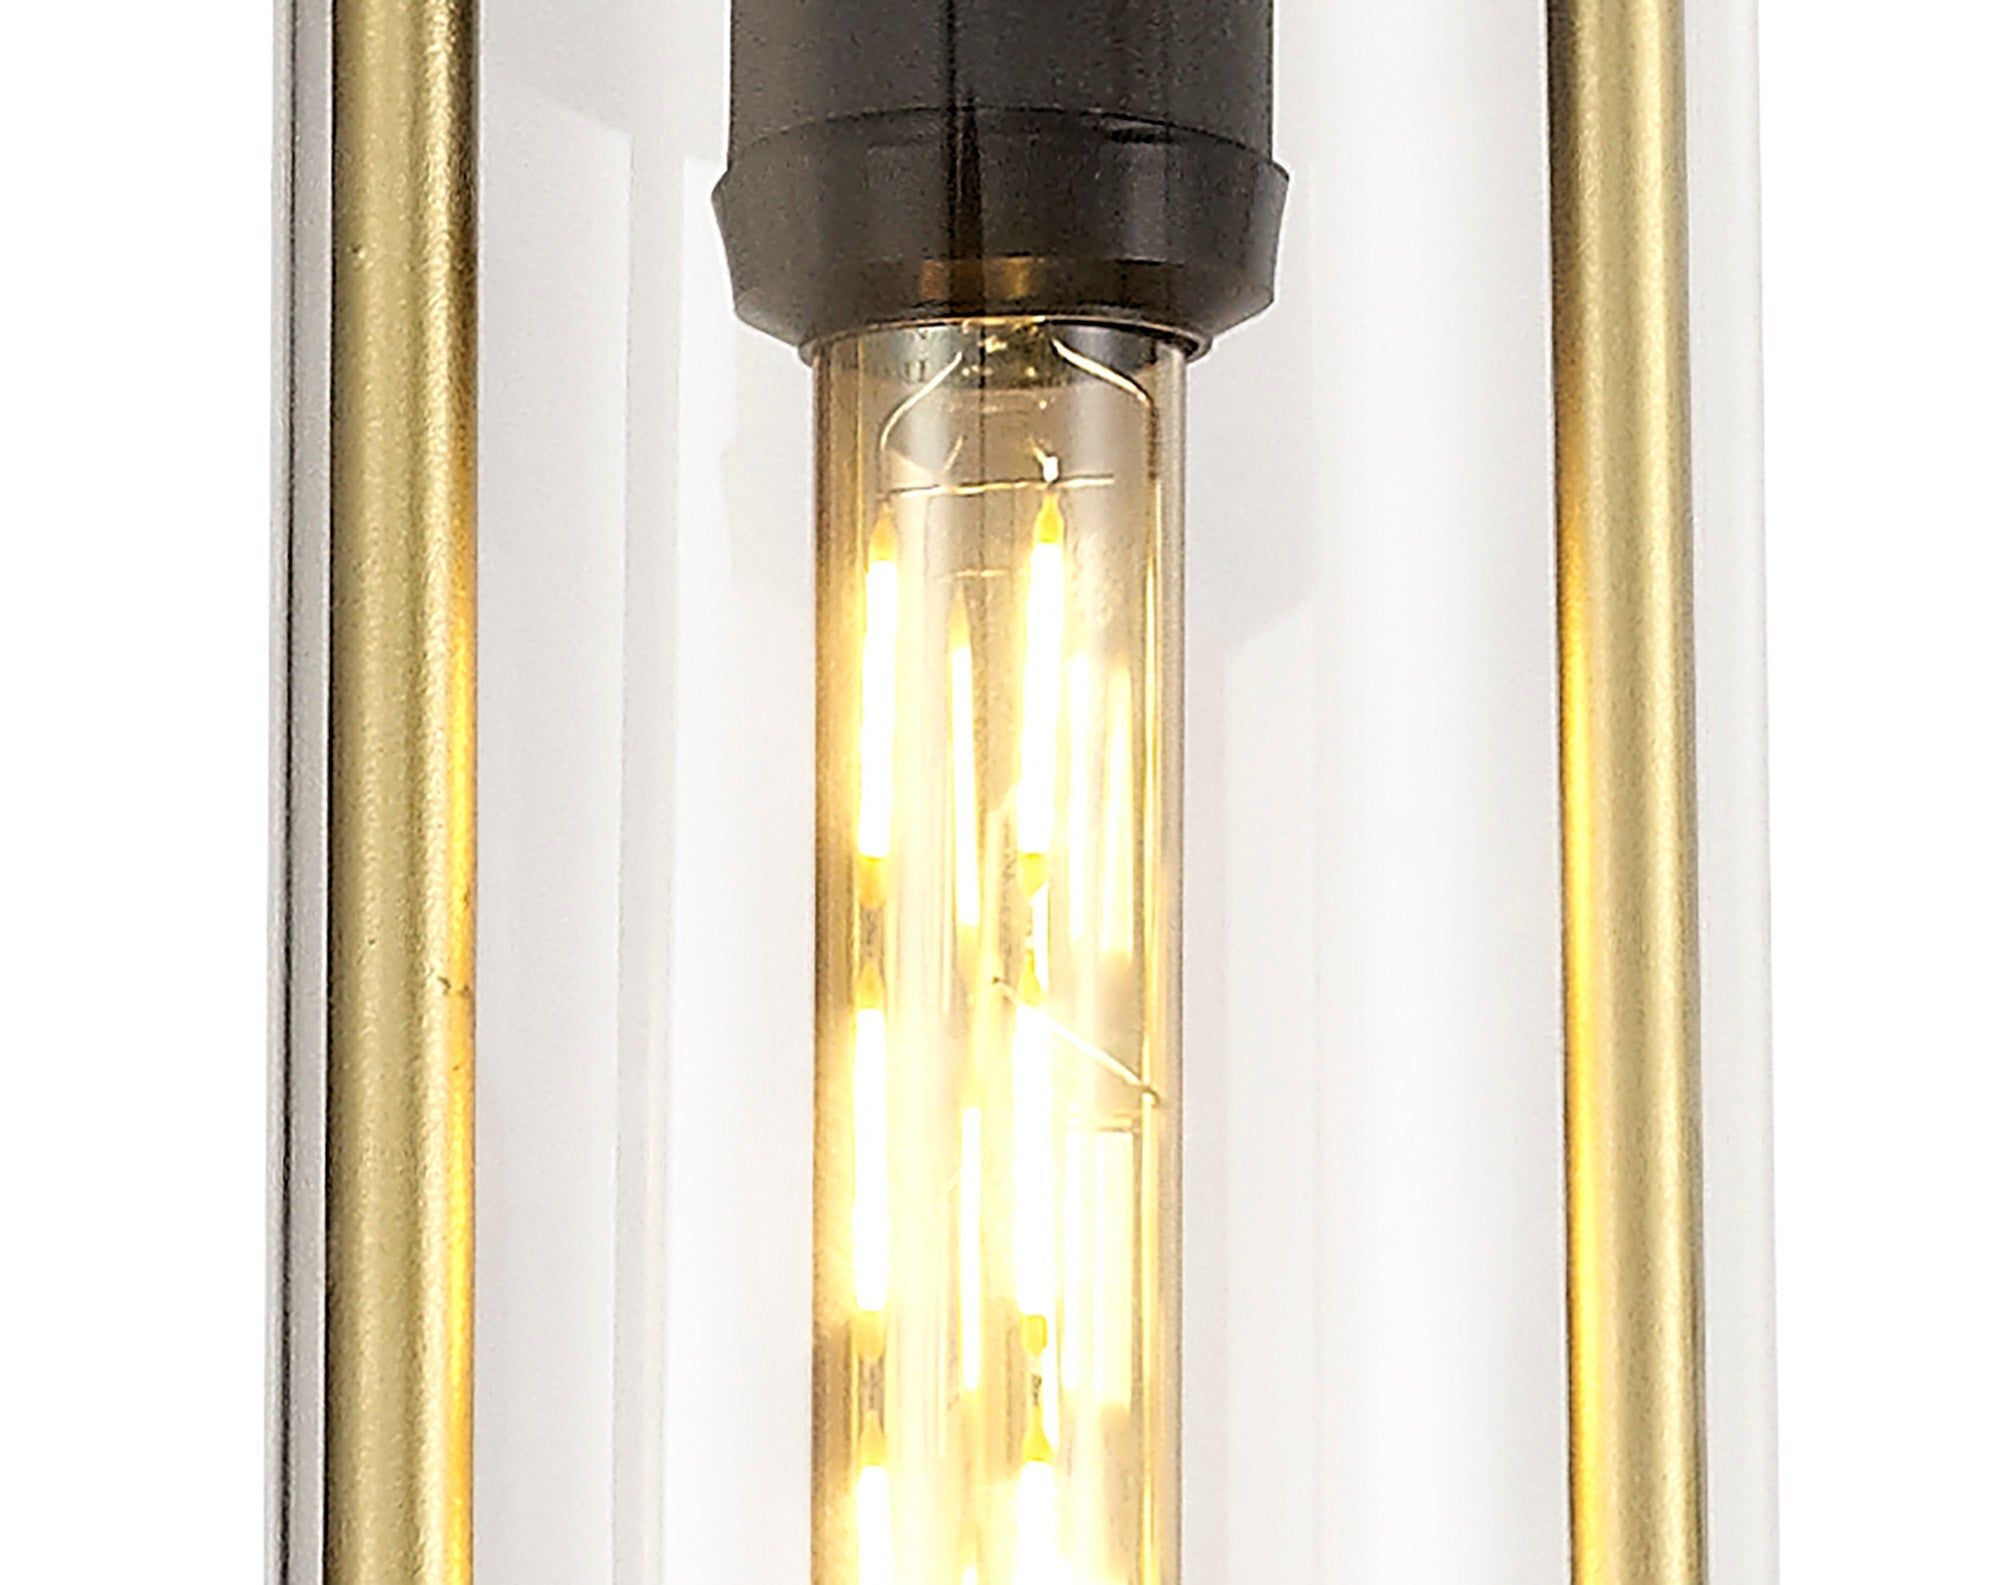 Ster Pendant, 1 x E27, Black & Gold/Clear Glass, IP54, 2yrs Warranty